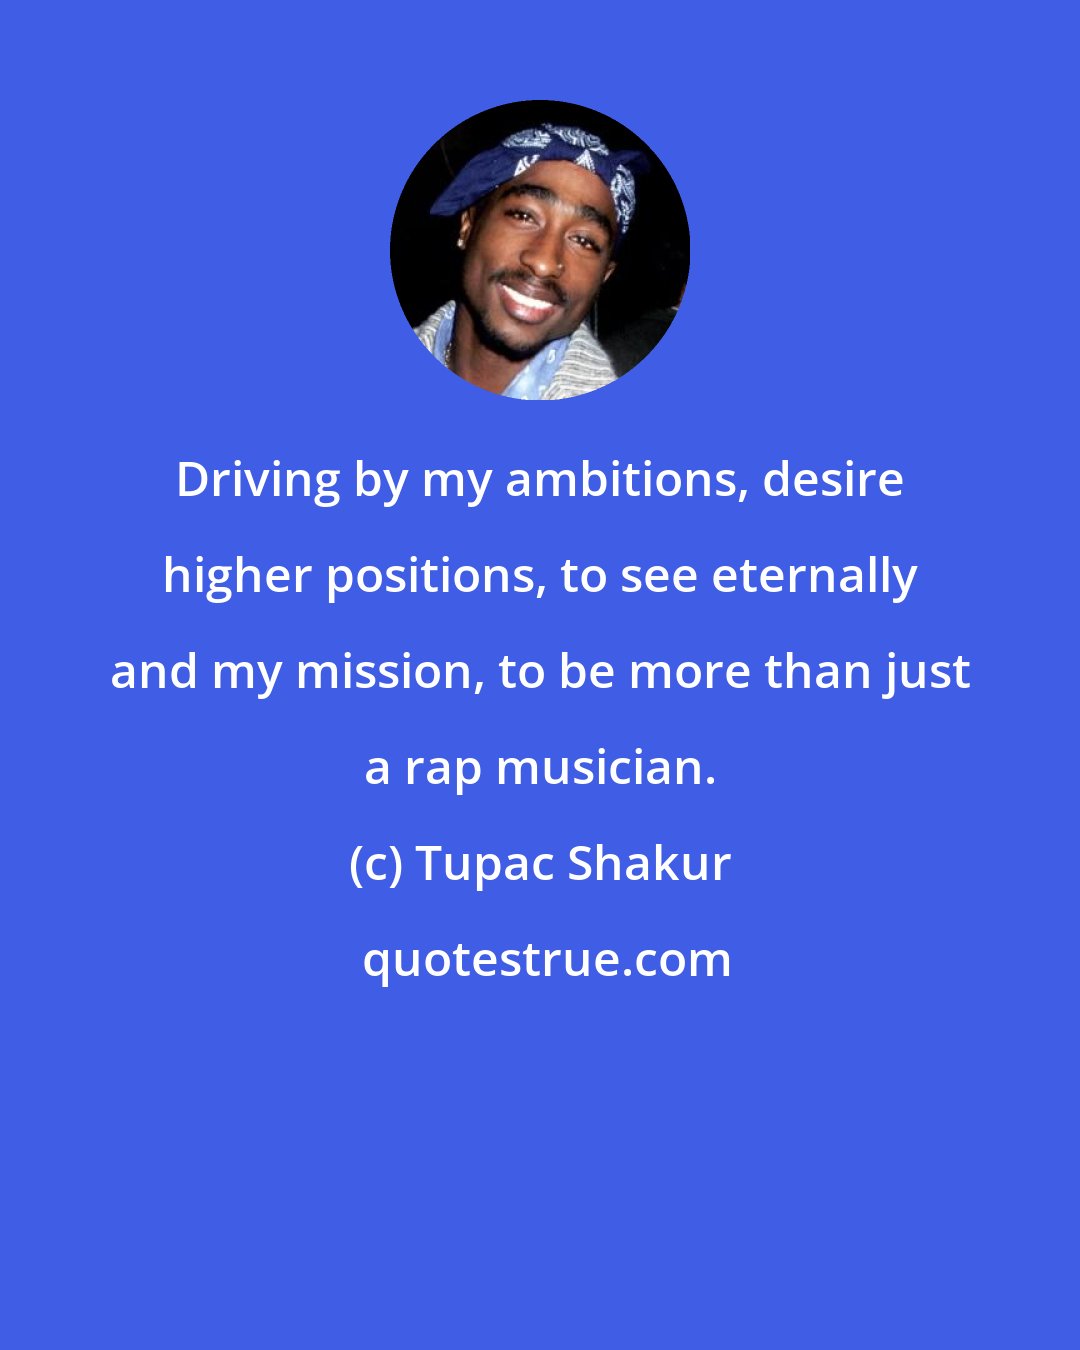 Tupac Shakur: Driving by my ambitions, desire higher positions, to see eternally and my mission, to be more than just a rap musician.